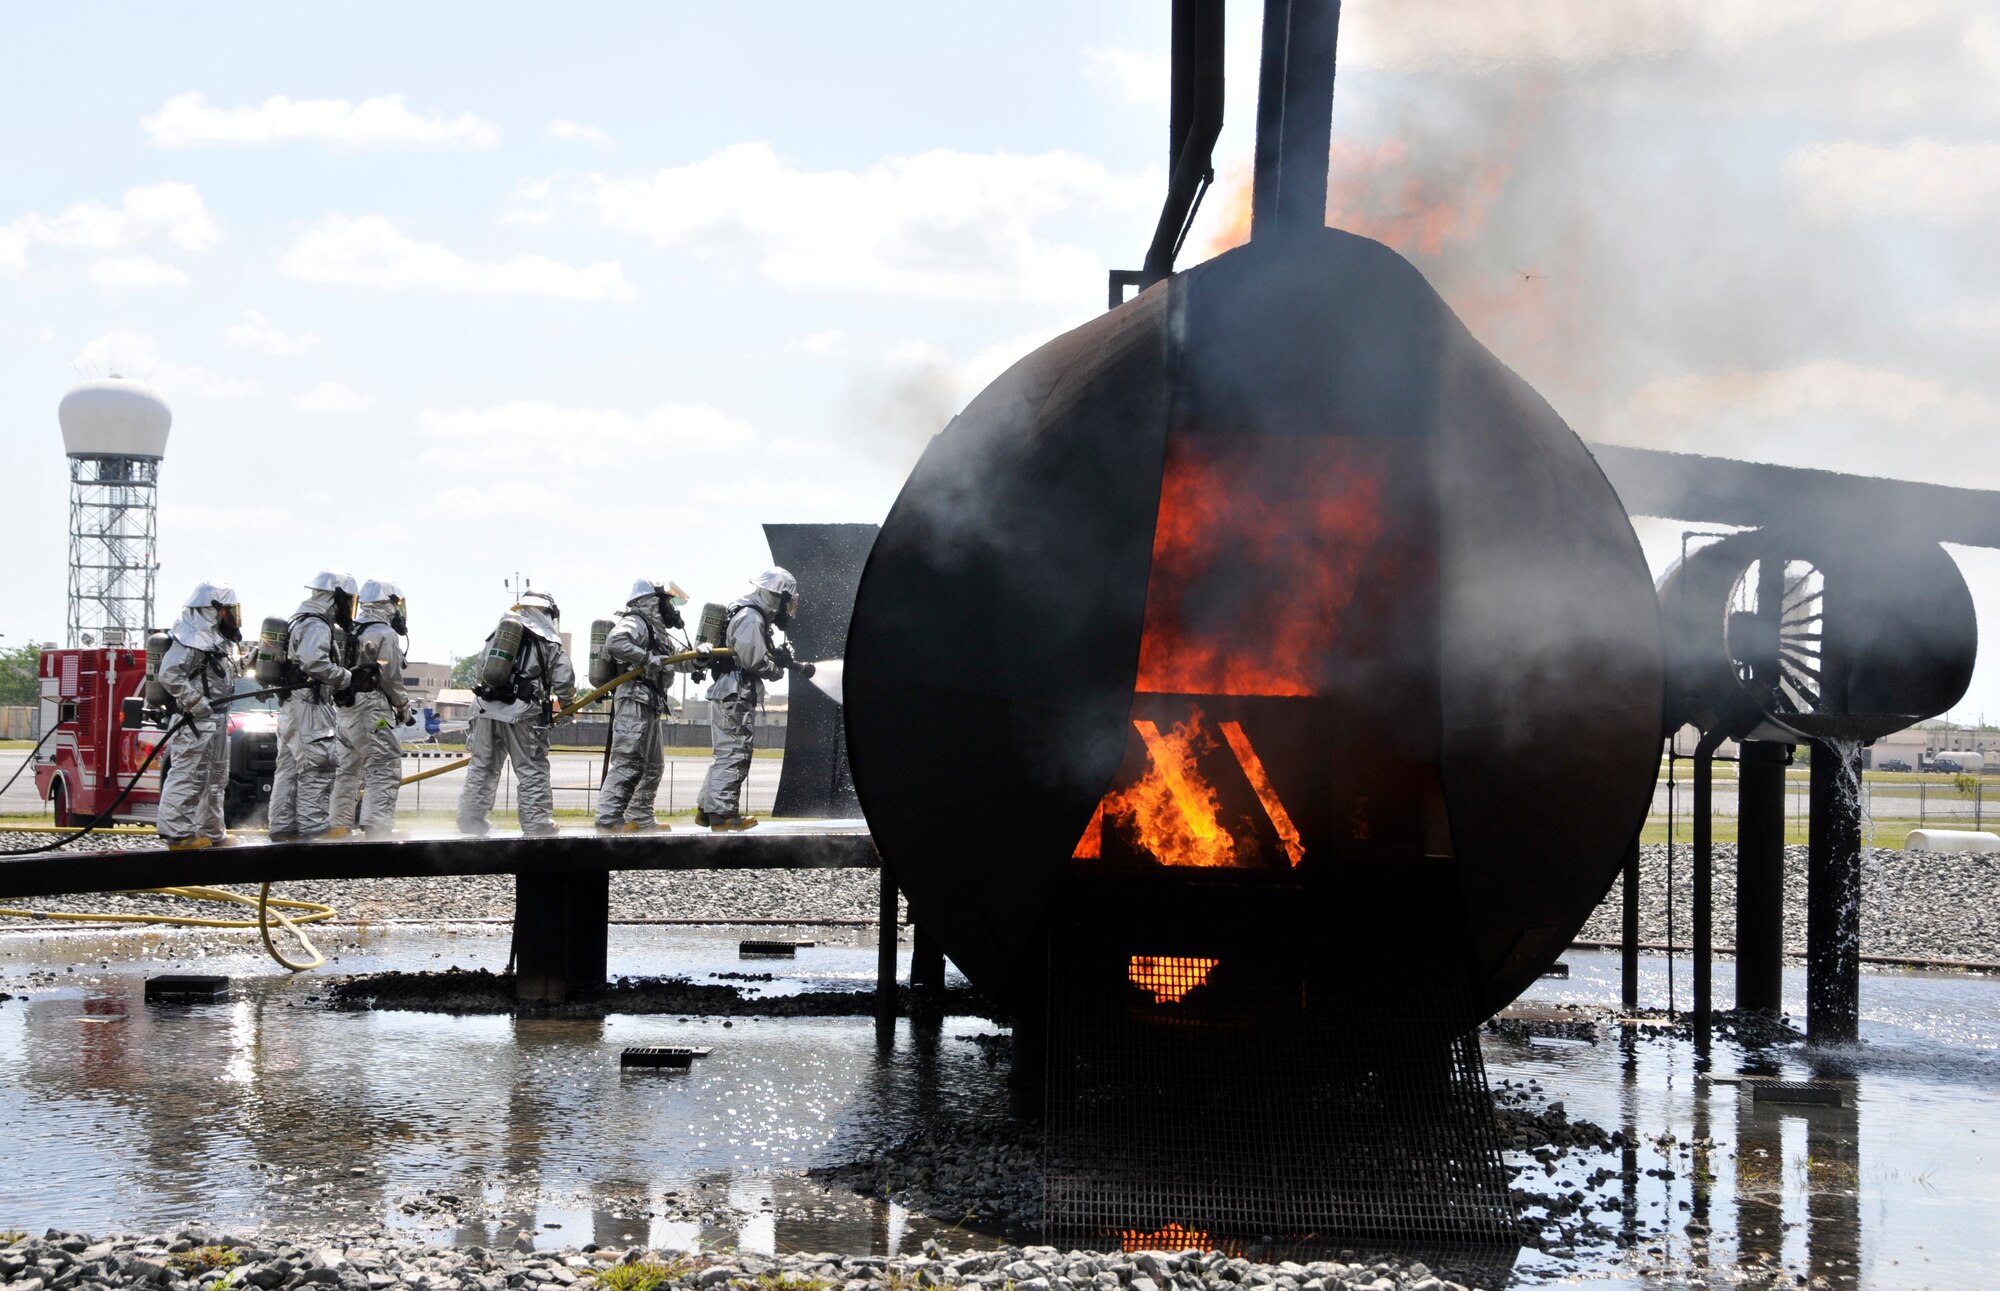 Members of Homestead Air Reserve Base, Fla.’s Fire Department enter the burning fuselage of a mock aircraft during aircraft live fire training at Homestead ARB May 15. Fires can heat up the mock aircraft to approximately 1,200 degrees. The aircraft live fire training consists of responding to the fire, setting up on the aircraft, deploying hose lines, and attacking and extinguishing the fire. (U.S. Air Force photo/Senior Airman Nicholas Caceres)